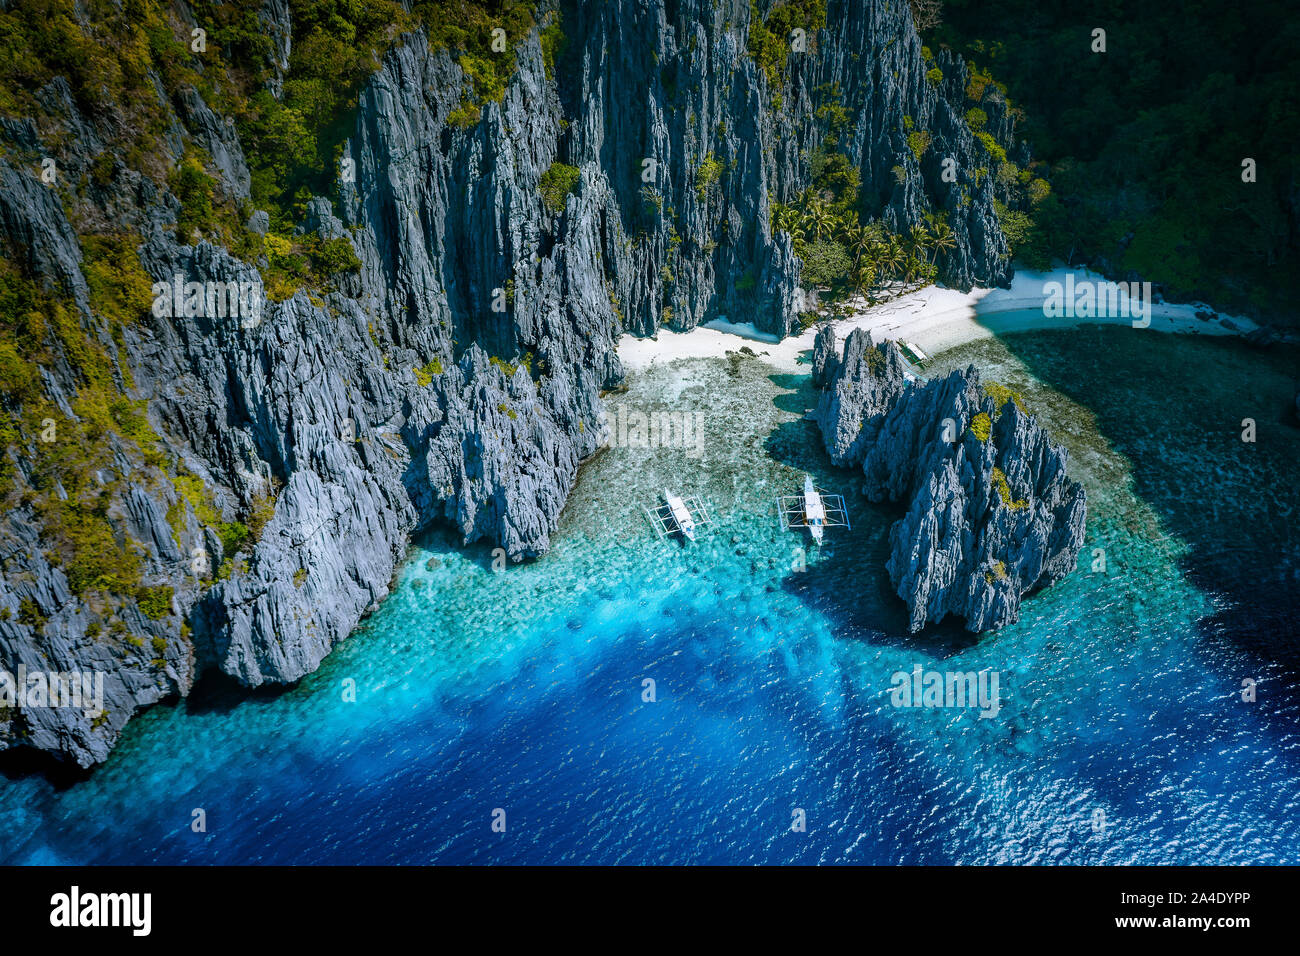 El Nido, Palawan, Philippines. Aerial above view of Secret hidden rocky lagoon beach with tourist banca boats in the cove surrounded by karst scenery Stock Photo